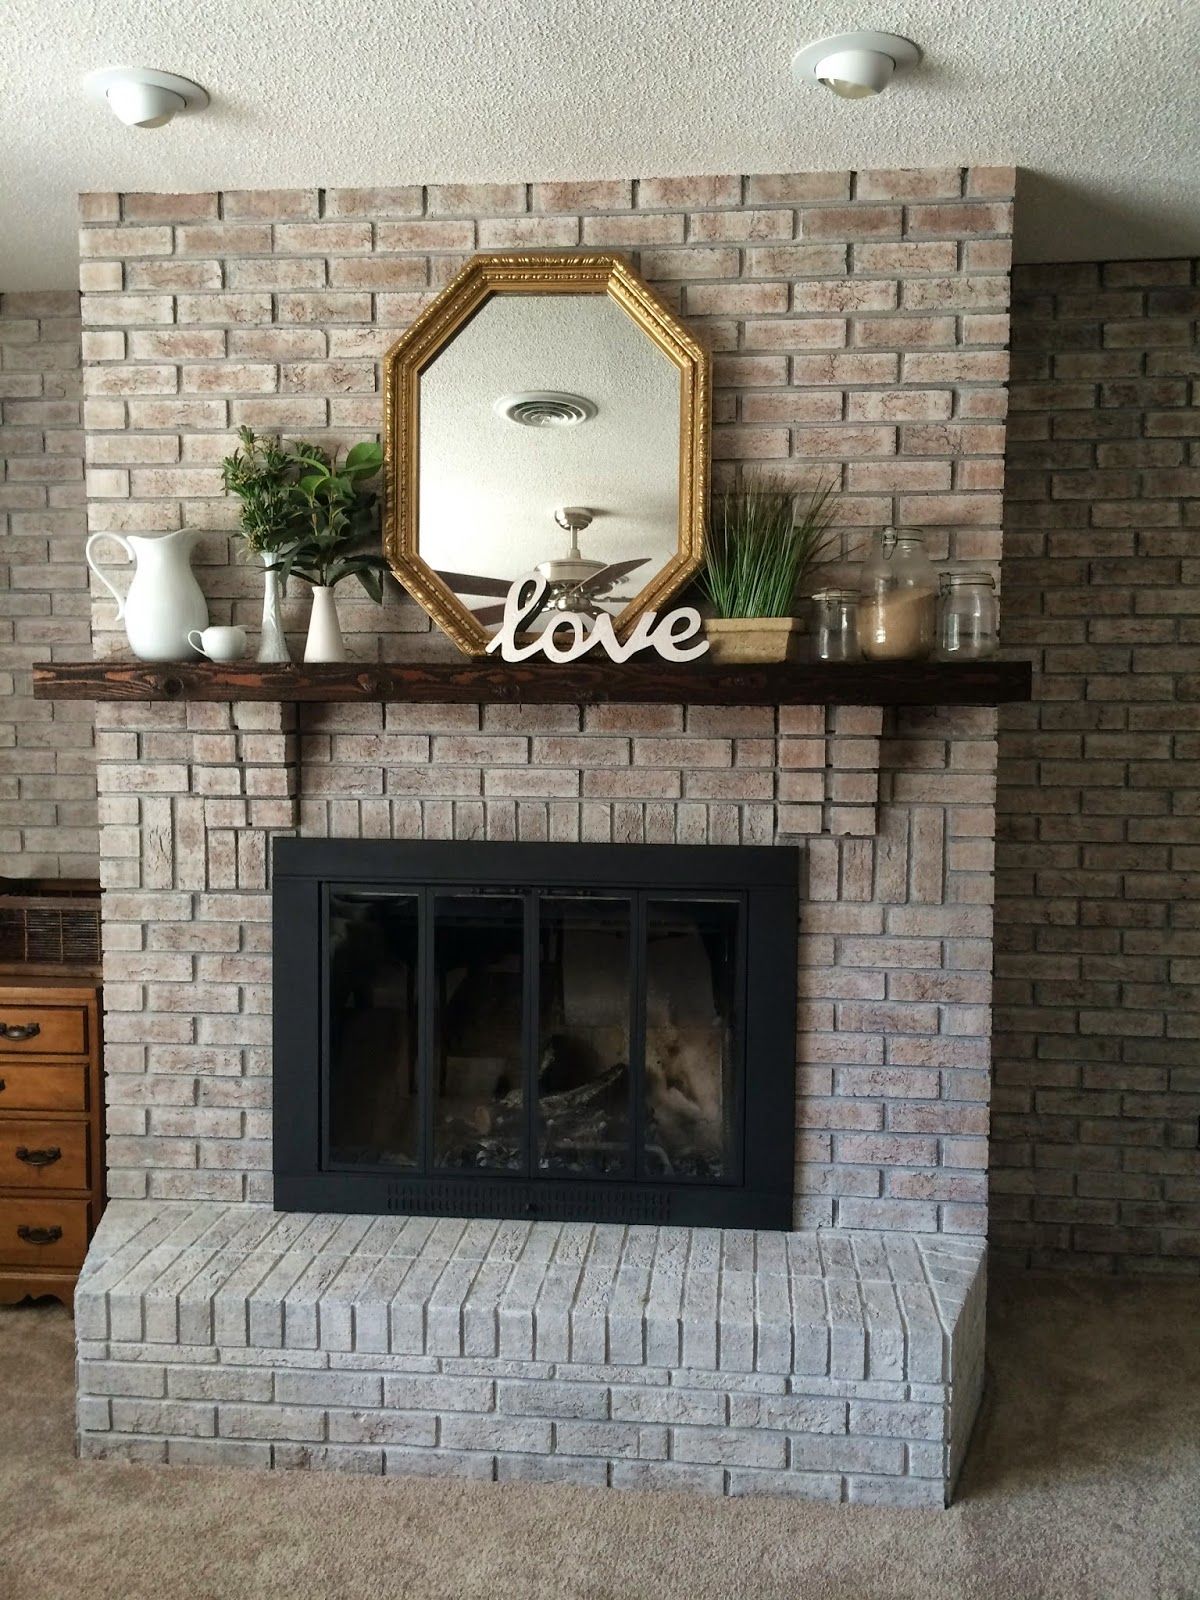 How to Clean A Gas Fireplace Best Of White Washing Brick with Gray Beige Walking with Dancers